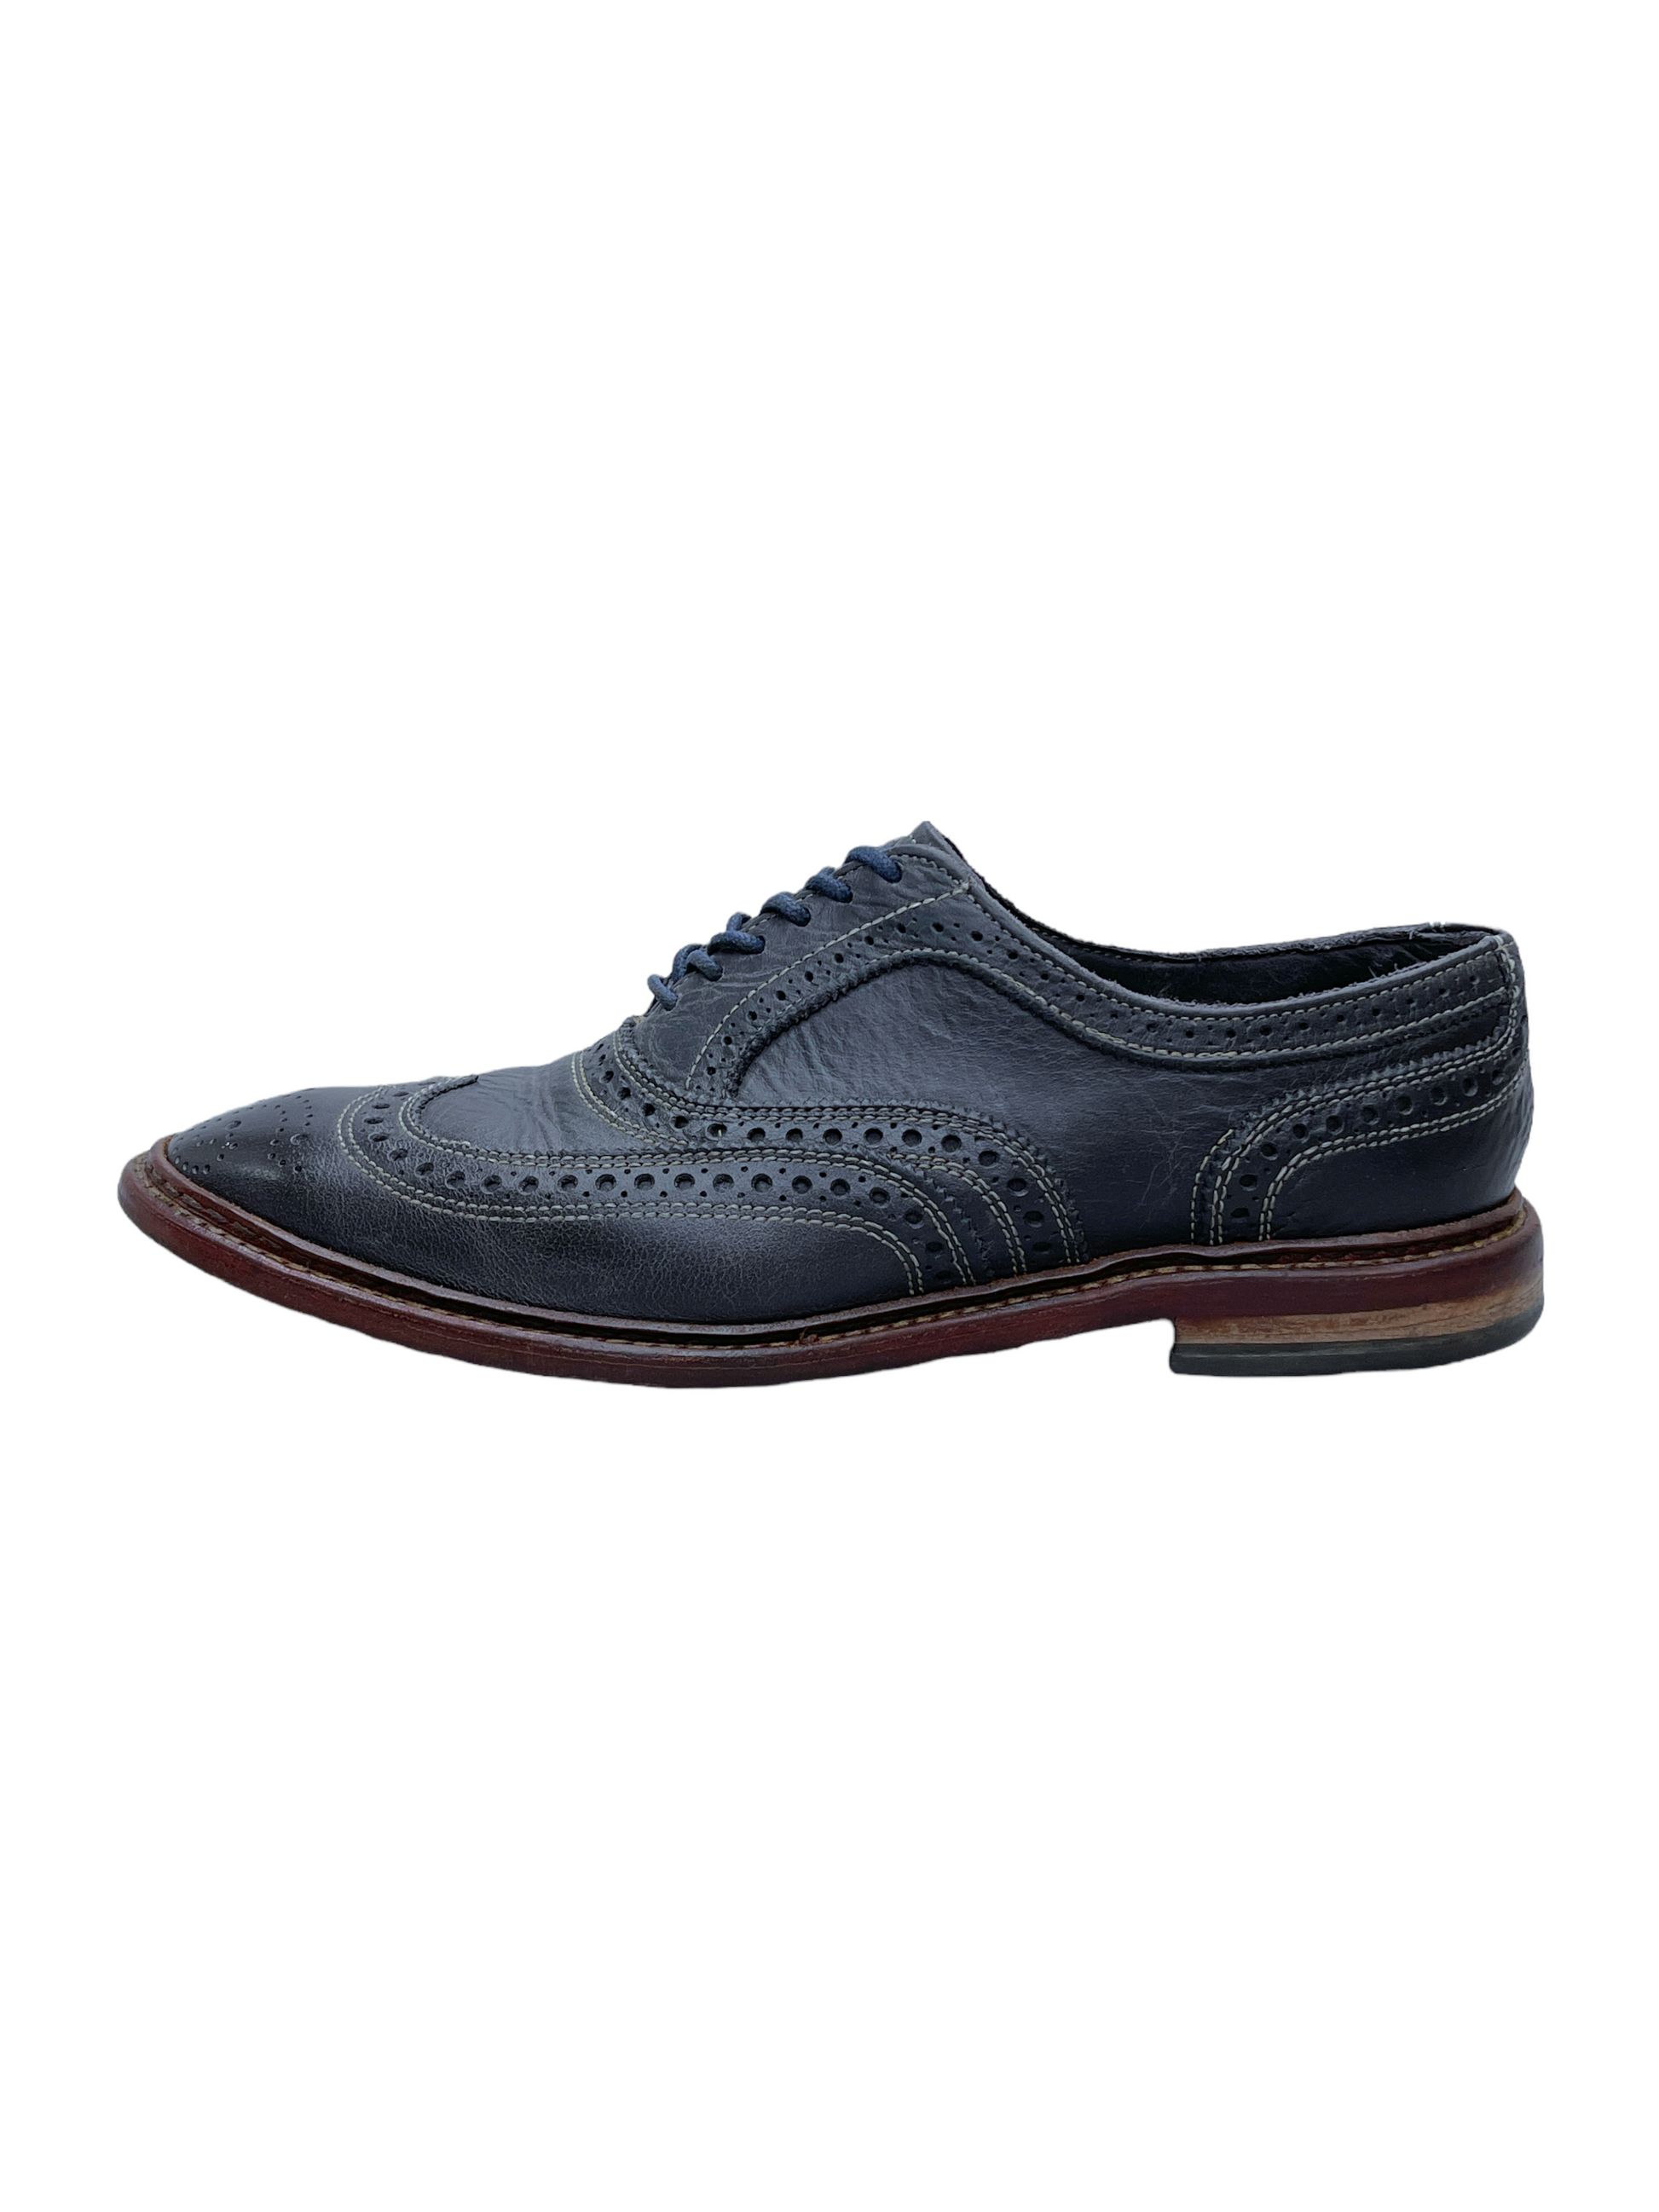 Allen Edmonds Neumok Navy Blue Leather Oxford Dress Shoes 9 D US Men —Genuine Design luxury consignment Calgary, Canada New and pre-owned clothing, shoes, accessories.